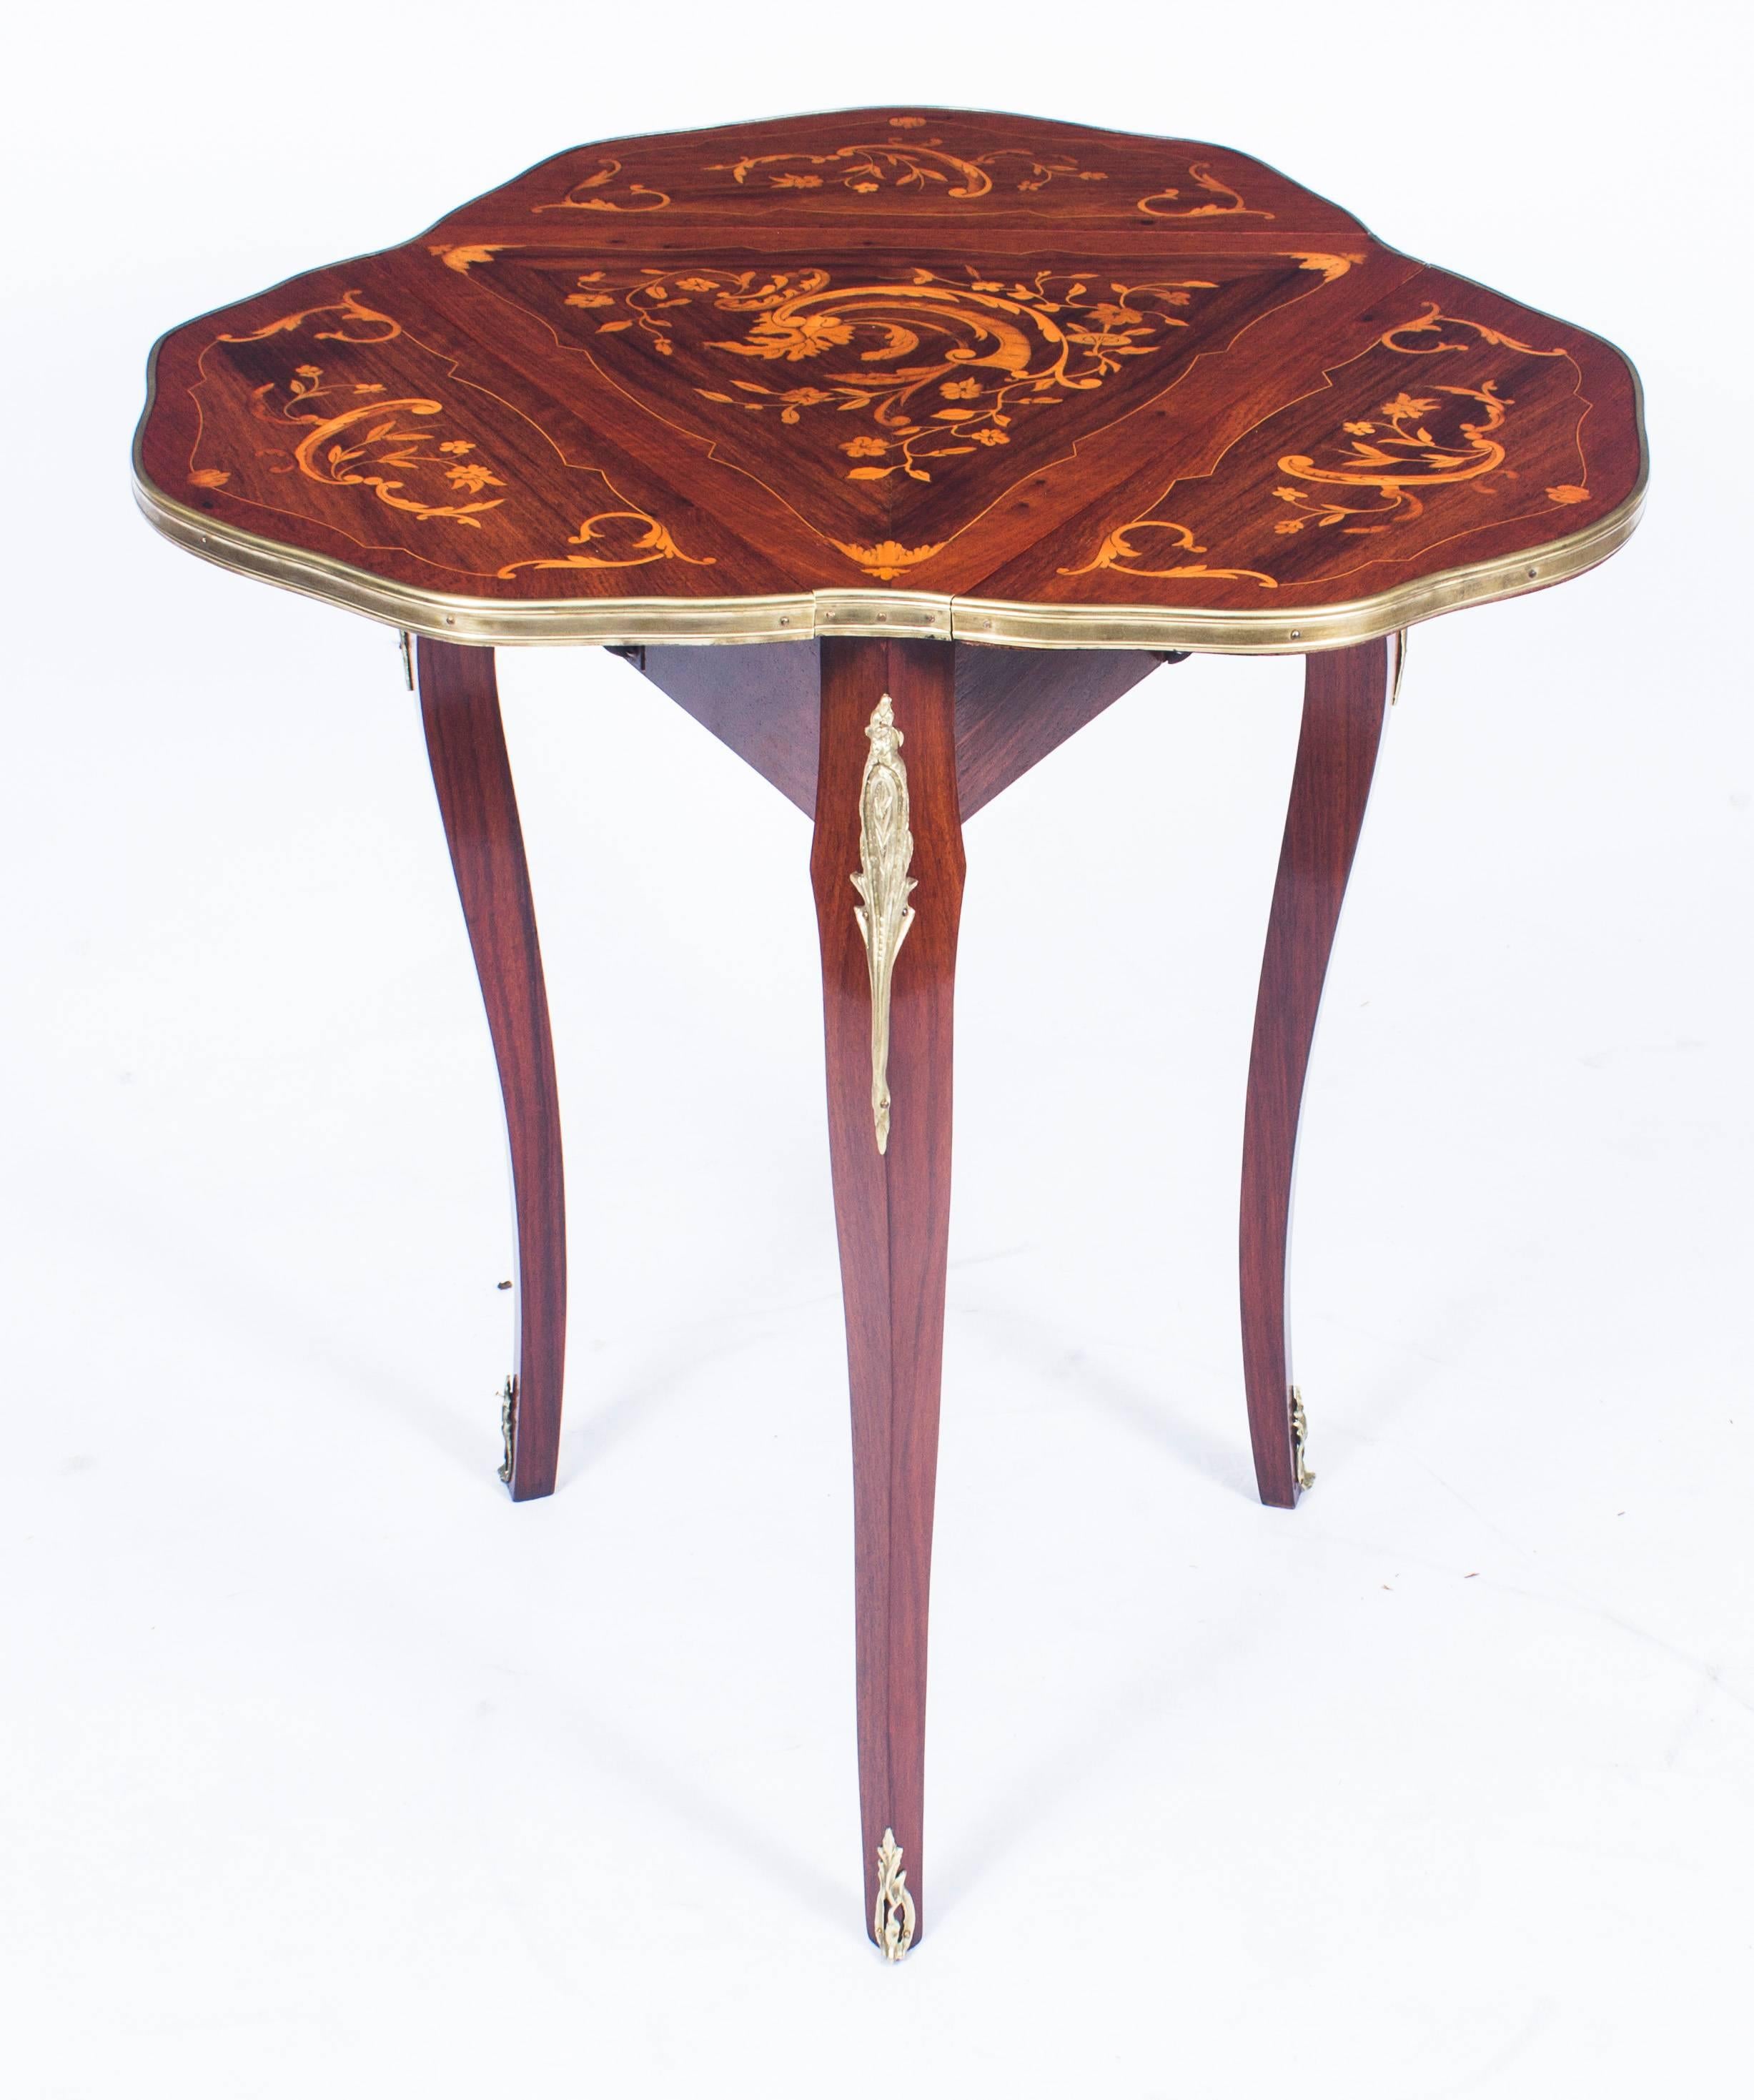 This is a beautiful antique Louis Revival ormolu mounted mahogany and marquetry triform occasional table, circa 1870 in date.

It has a shaped top and fall leaves inlaid with the most beautiful marquetry decoration of flowering stems and leafy